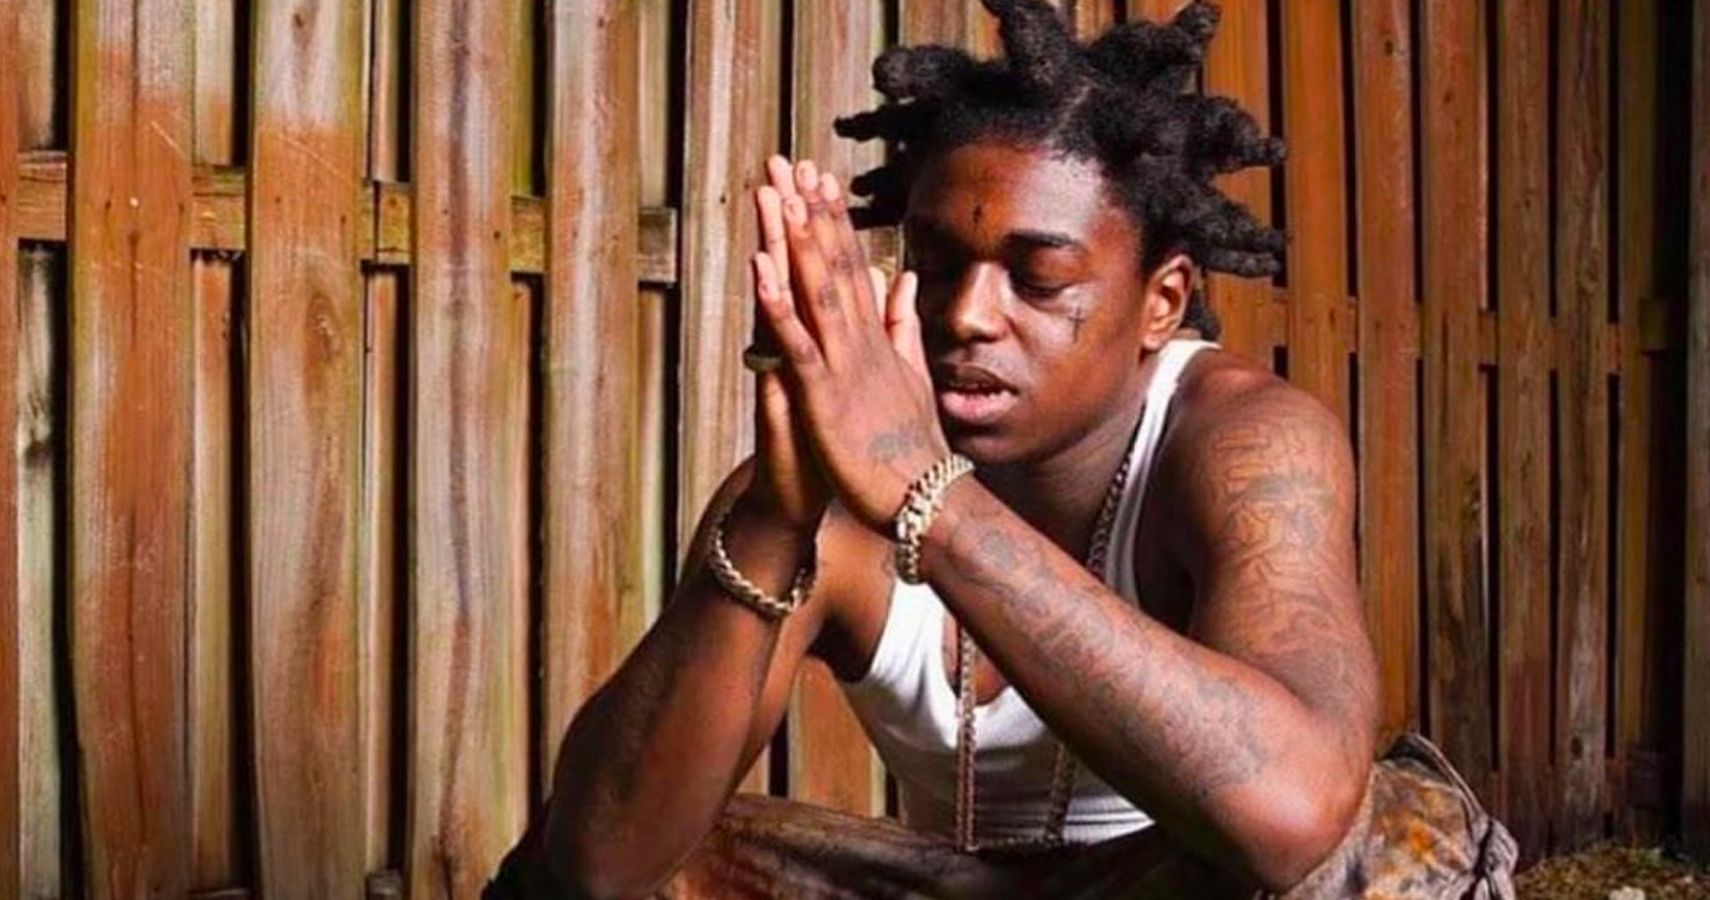 Kodak Black Gets Multiple Charges Dropped | TheRichest.com